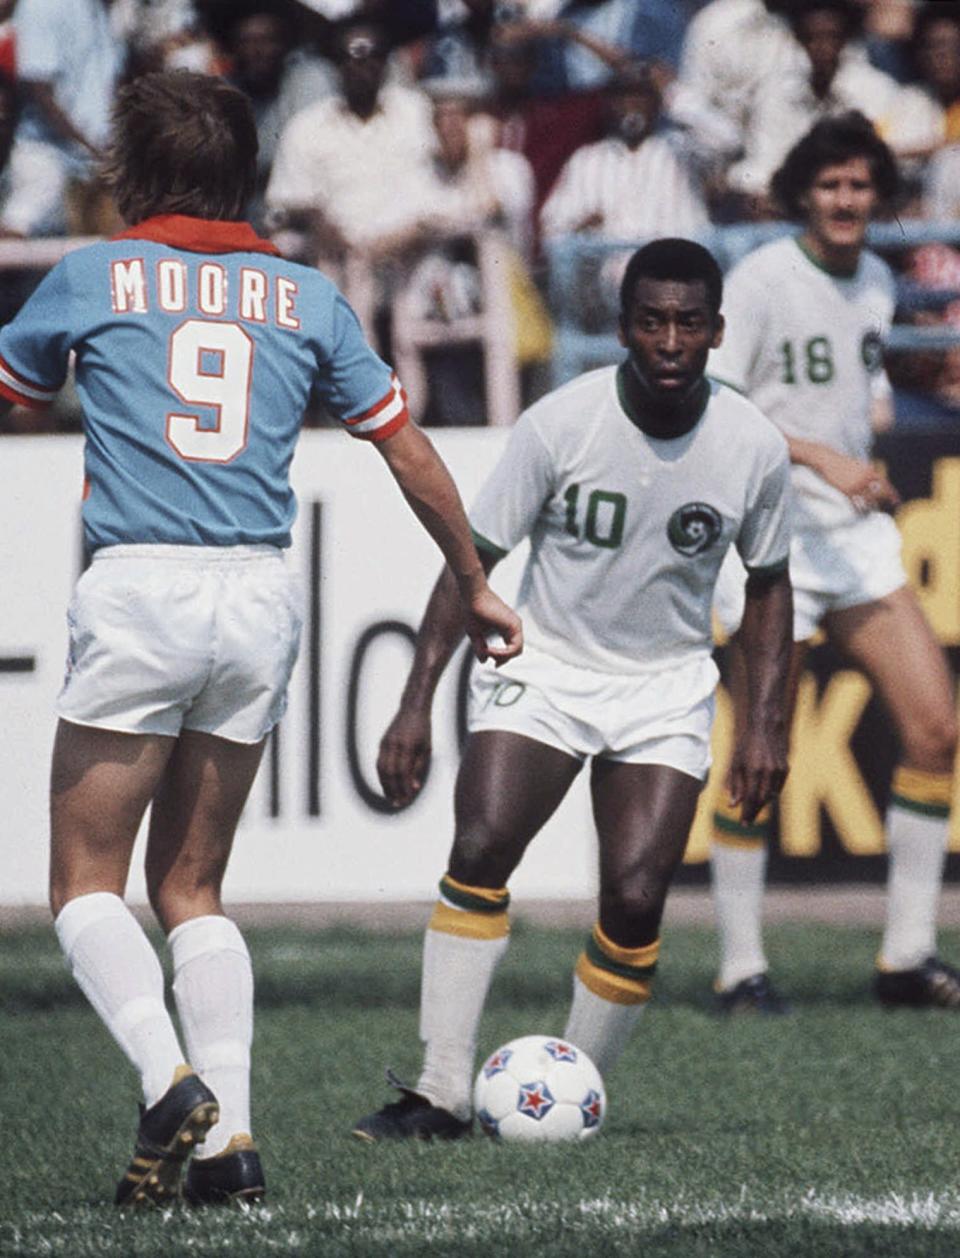 FILE - Pele of the New York Cosmos makes his professional debut with the team in an exhibition game against the Dallas Tornado in this June 15, 1975 photo at New York's Downing Stadium. Dozens of meetings over four years led to Pelé agreeing to sign with Cosmos in June 1975. His 2 1/2 seasons in New York elevated the sport, putting U.S. soccer on a path to hosting the World Cup in 1994 and launching Major League Soccer two years later. (AP Photo, File)